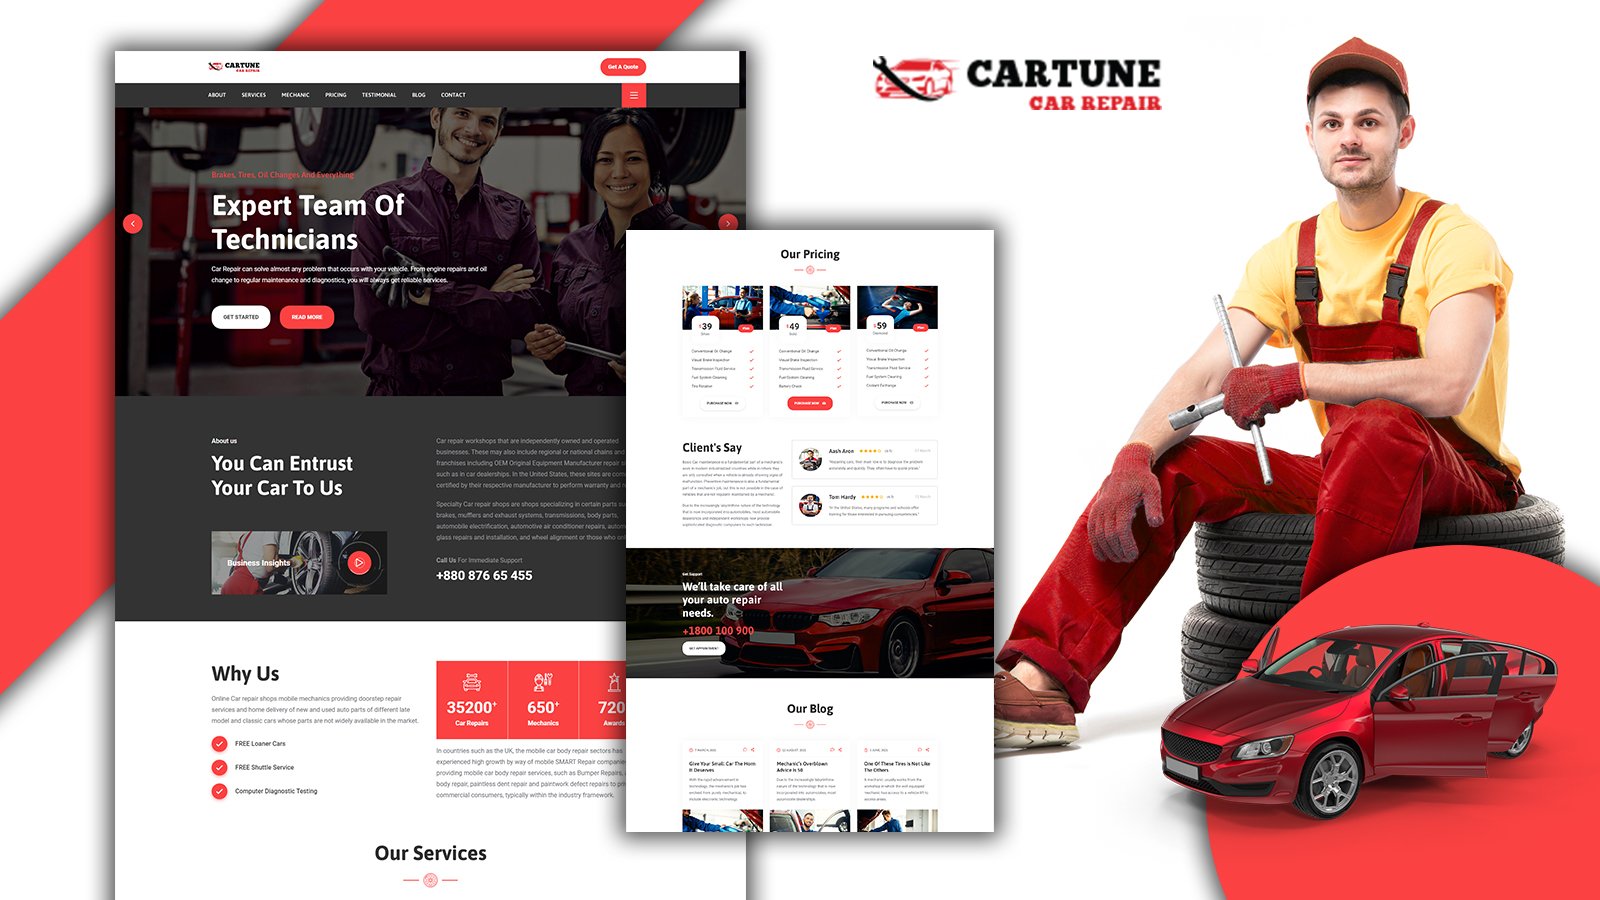 Cartune Car Repair Services Landing Page HTML5 Template